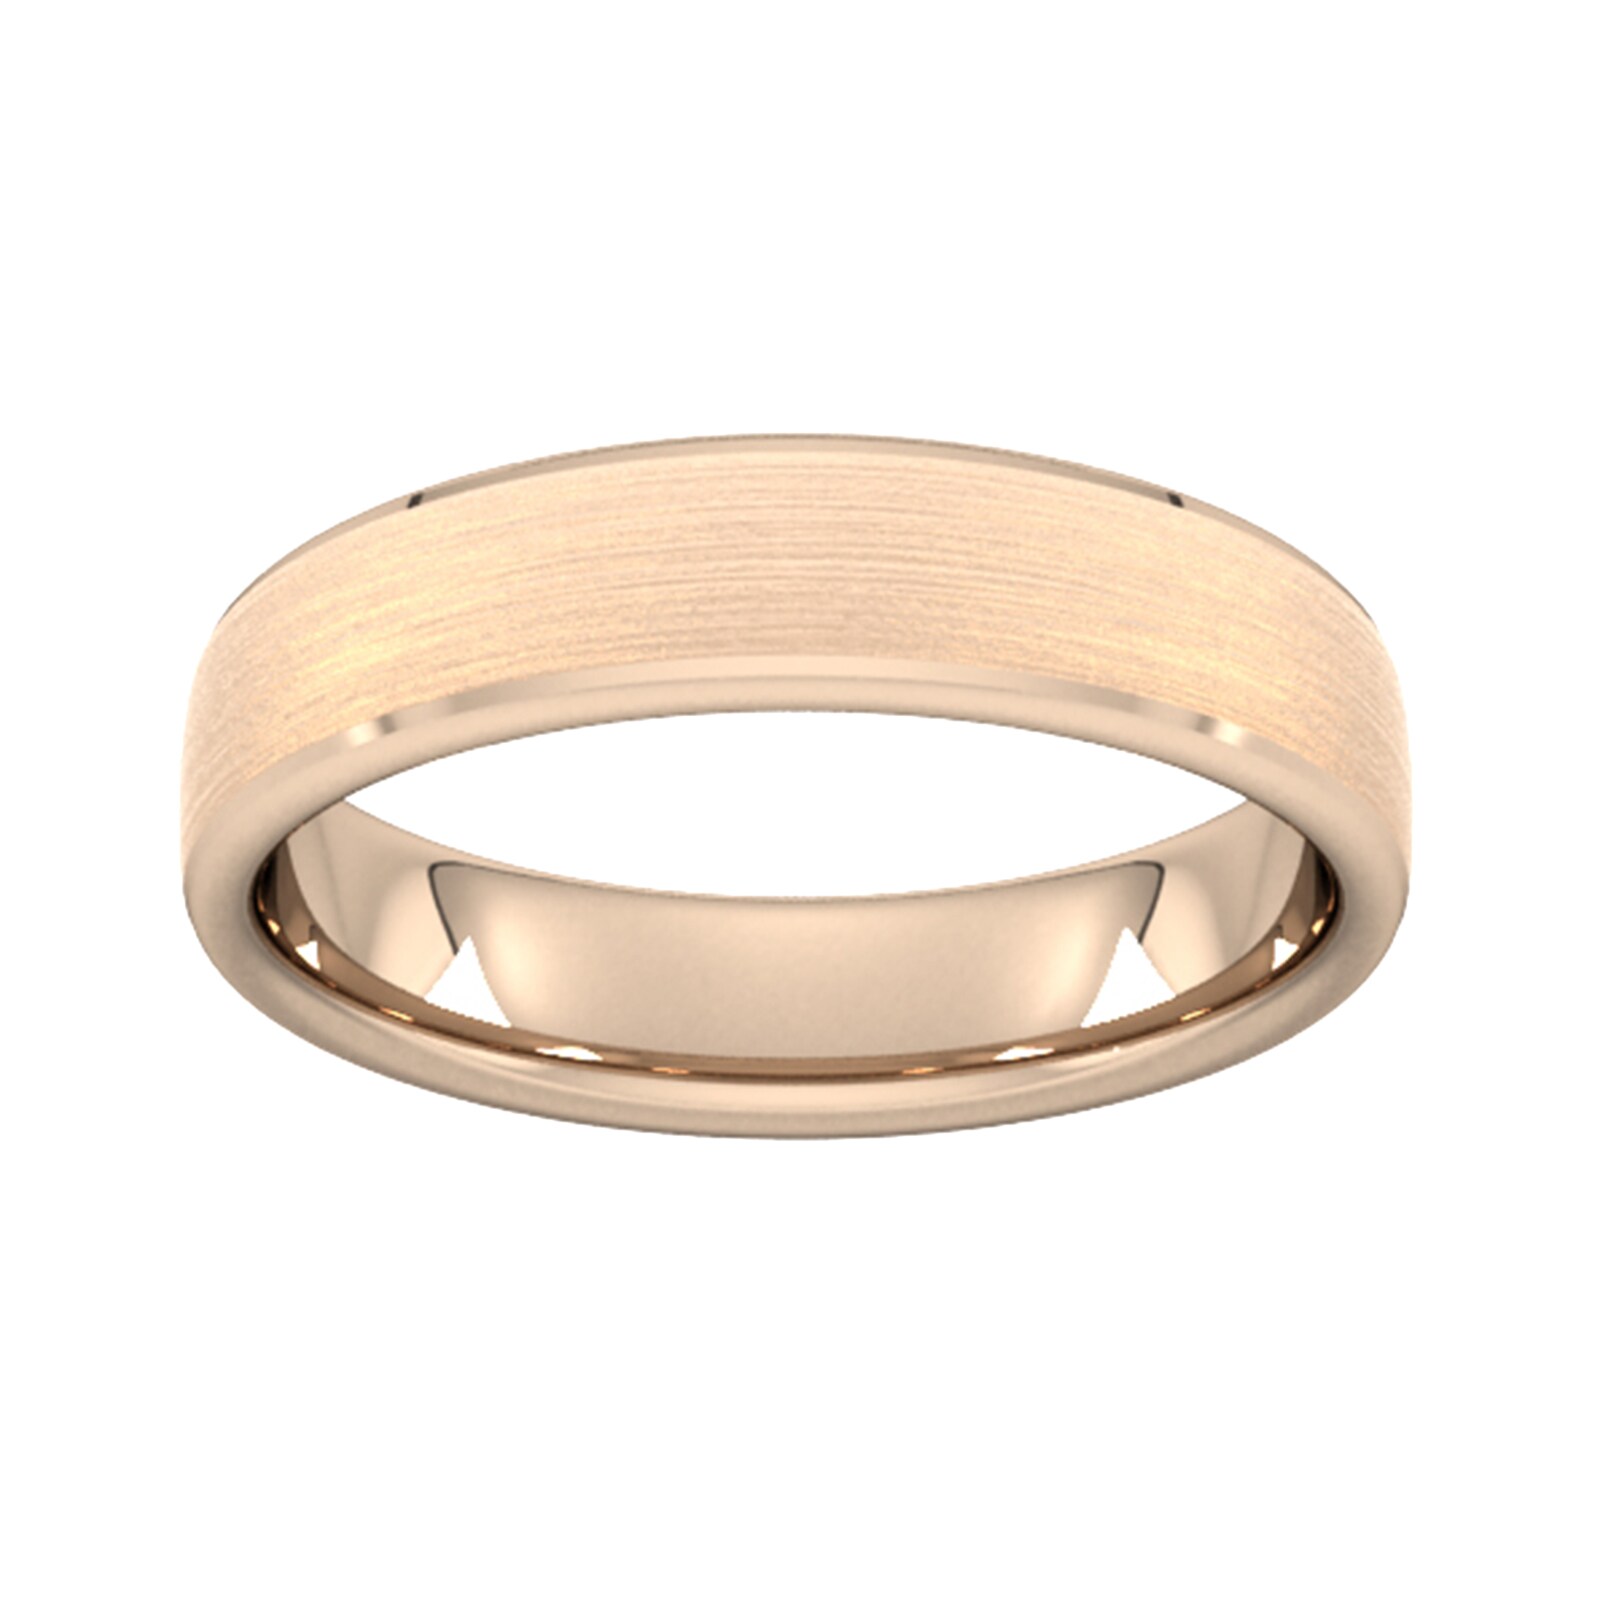 5mm Slight Court Heavy Polished Chamfered Edges With Matt Centre Wedding Ring In 18 Carat Rose Gold - Ring Size W